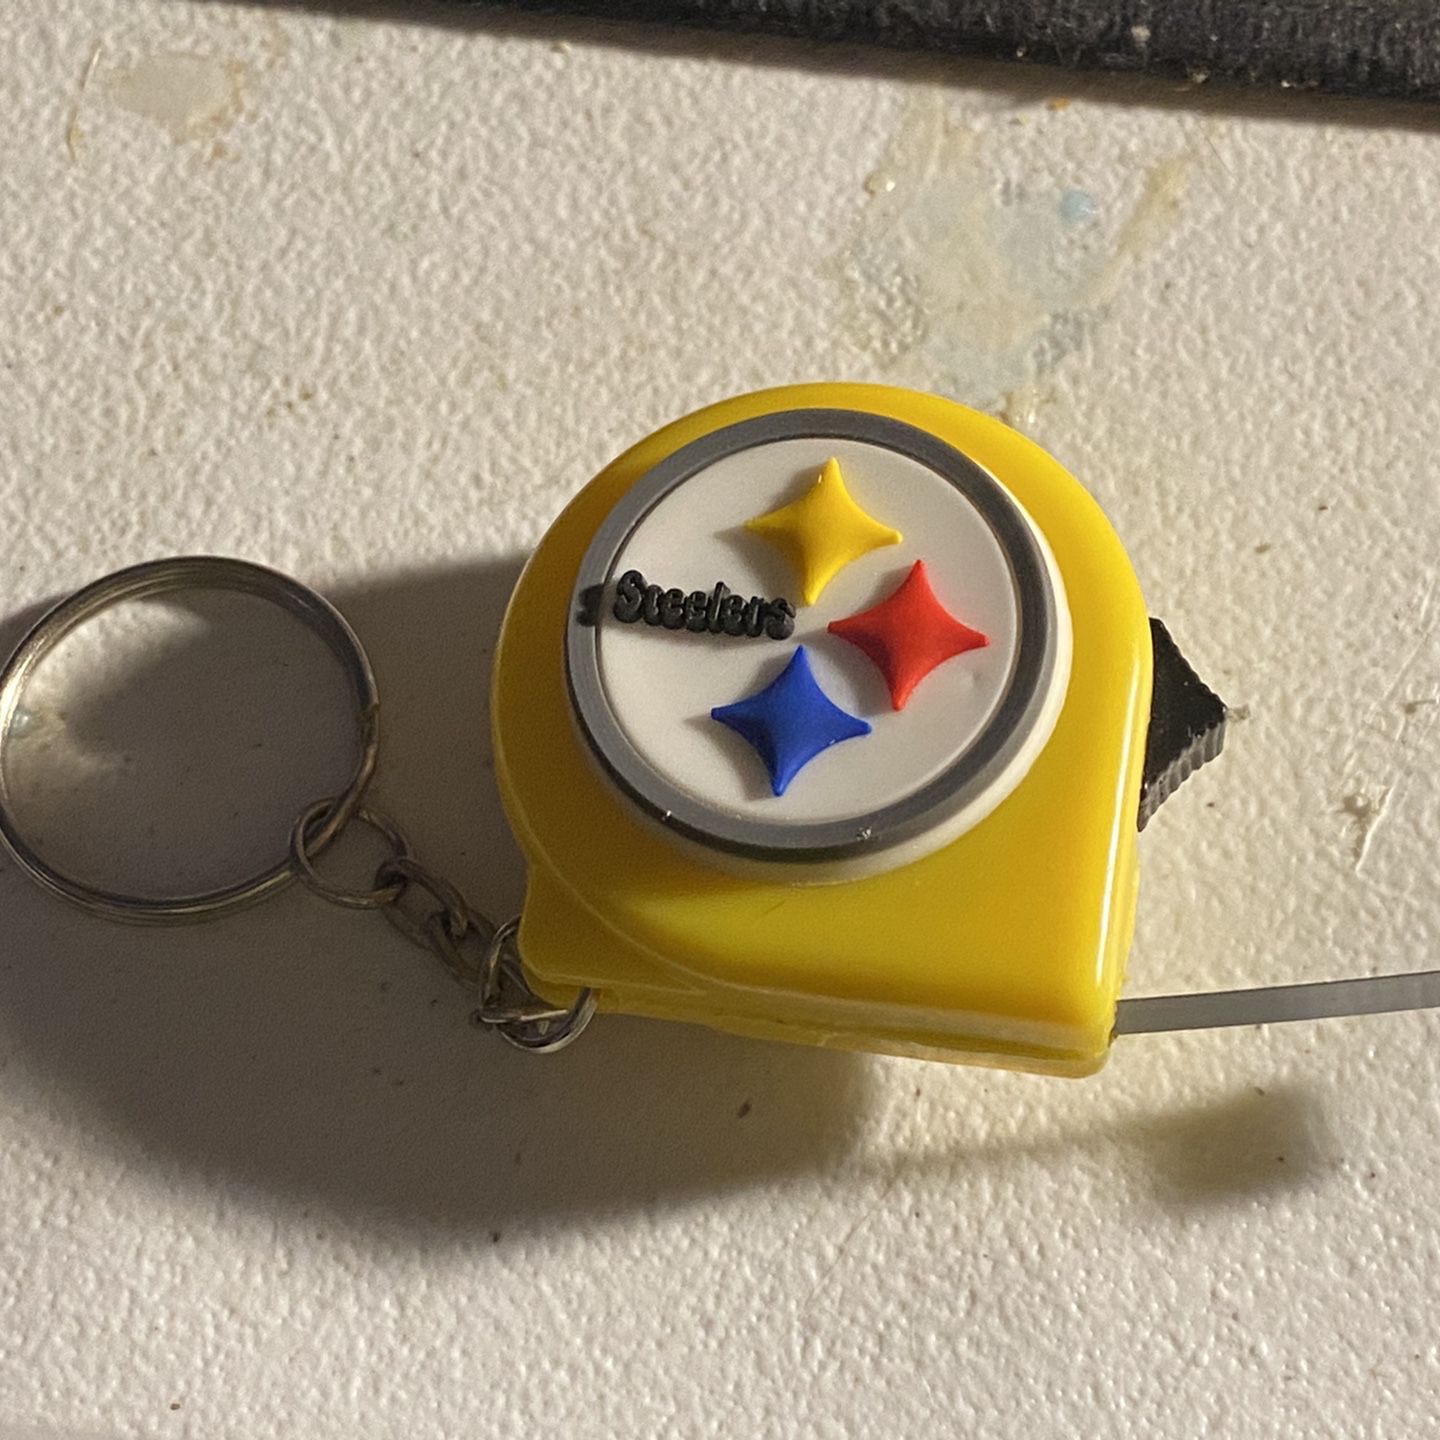 Pittsburgh Steelers NFL Keychain for Sale in St. Louis, MO - OfferUp